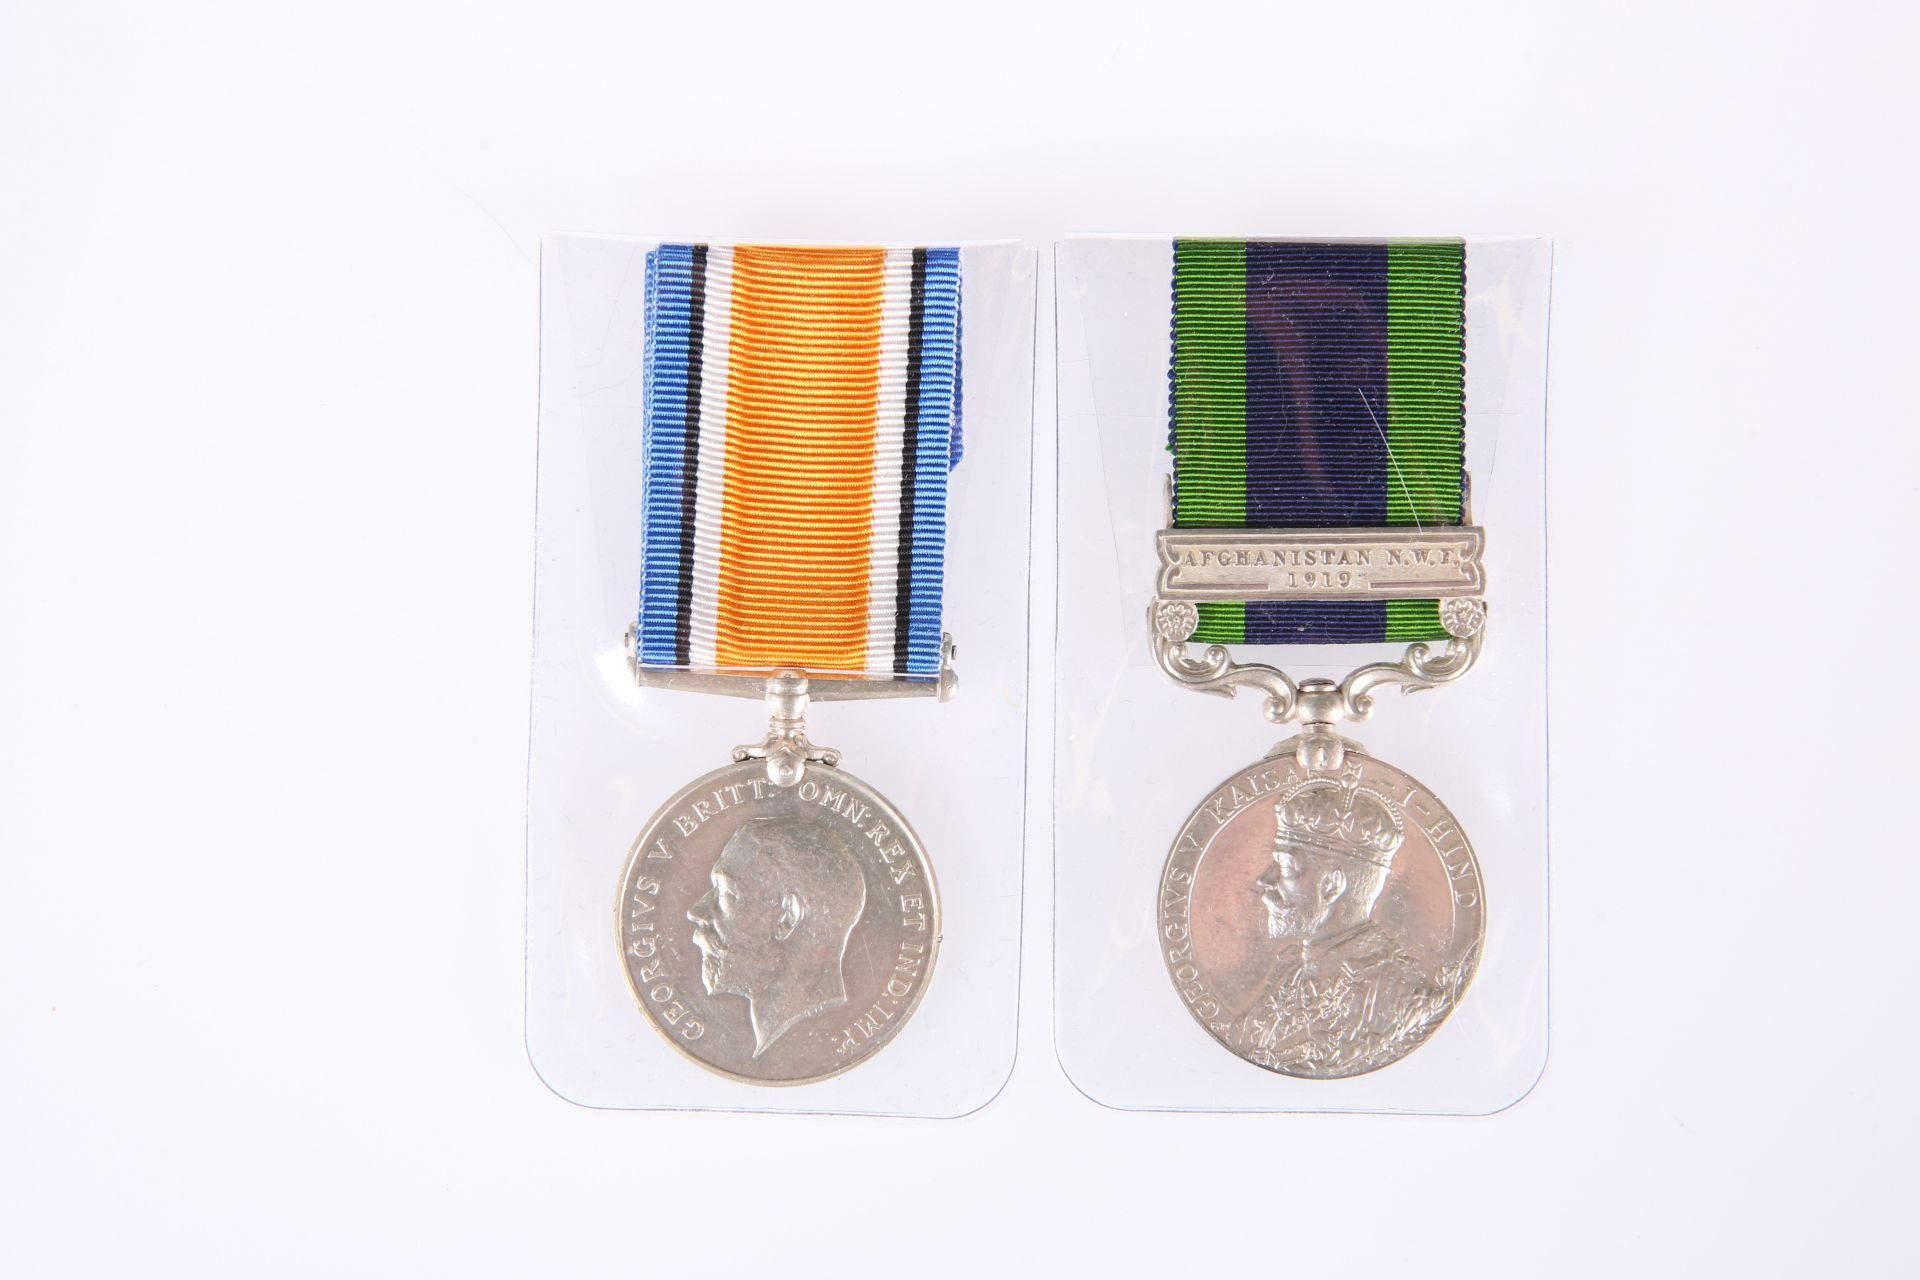 BWM AND INDIA GENERAL SERVICE MEDAL, 2nd Lt. A.W. Butt R.A.